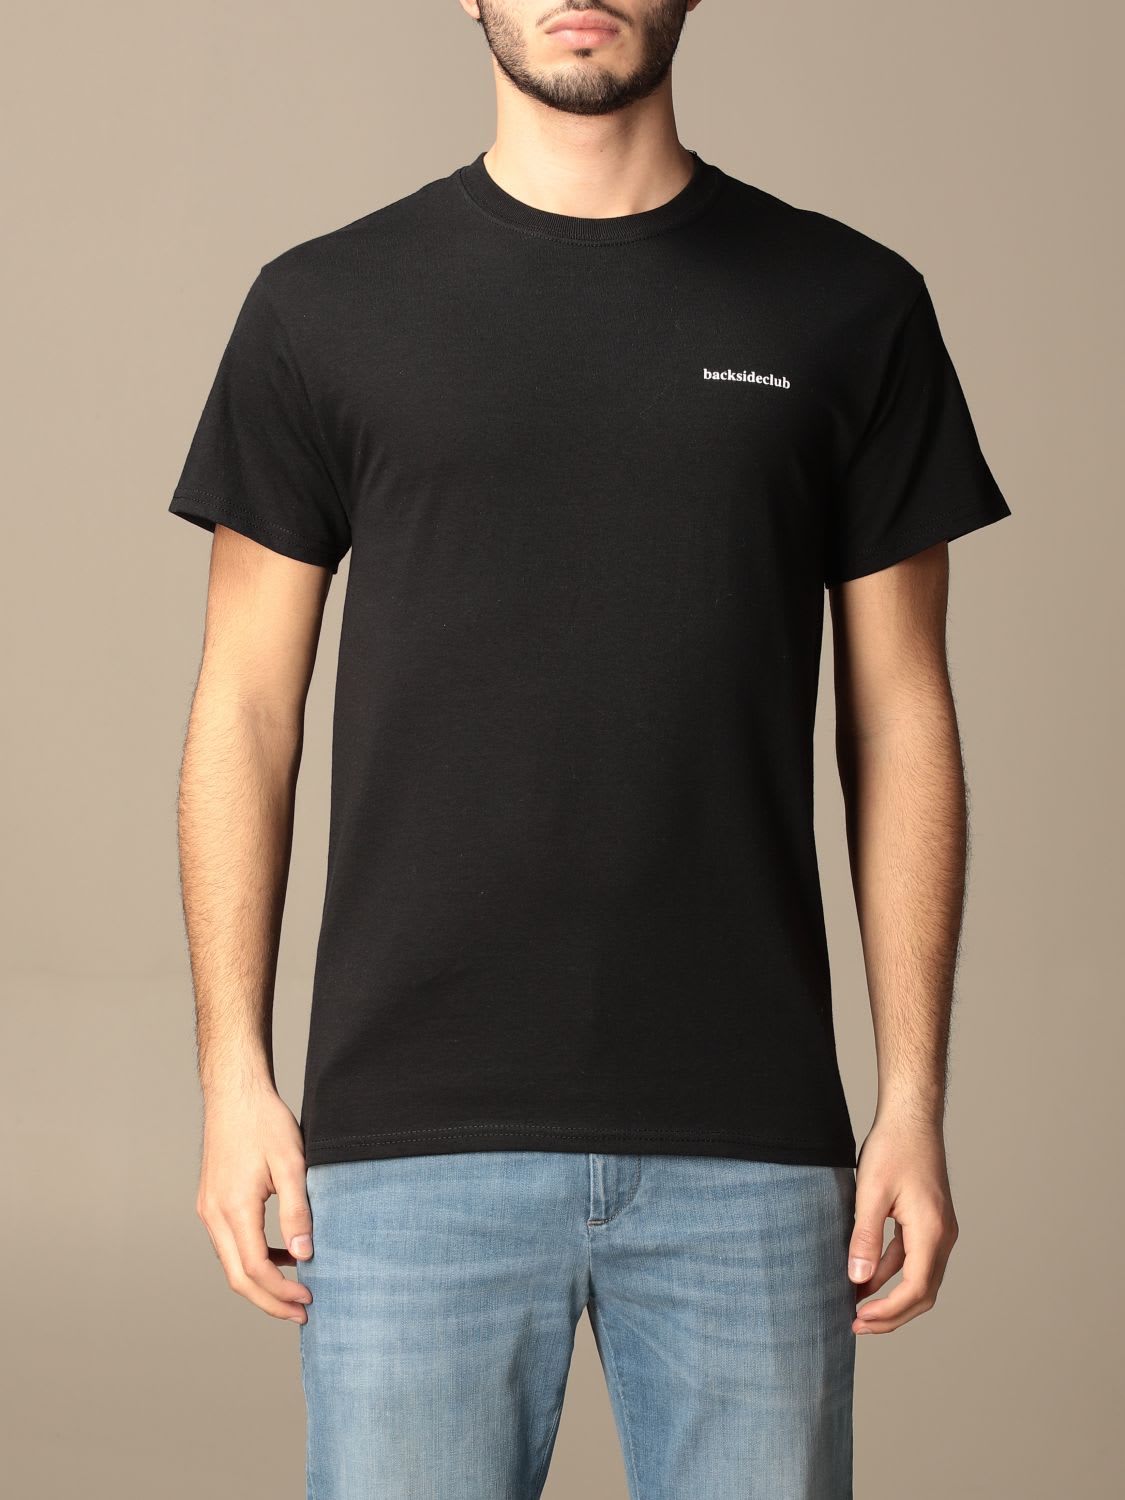 Backsideclub T-shirt Logo Backsideclub T-shirt In Cotton With Print